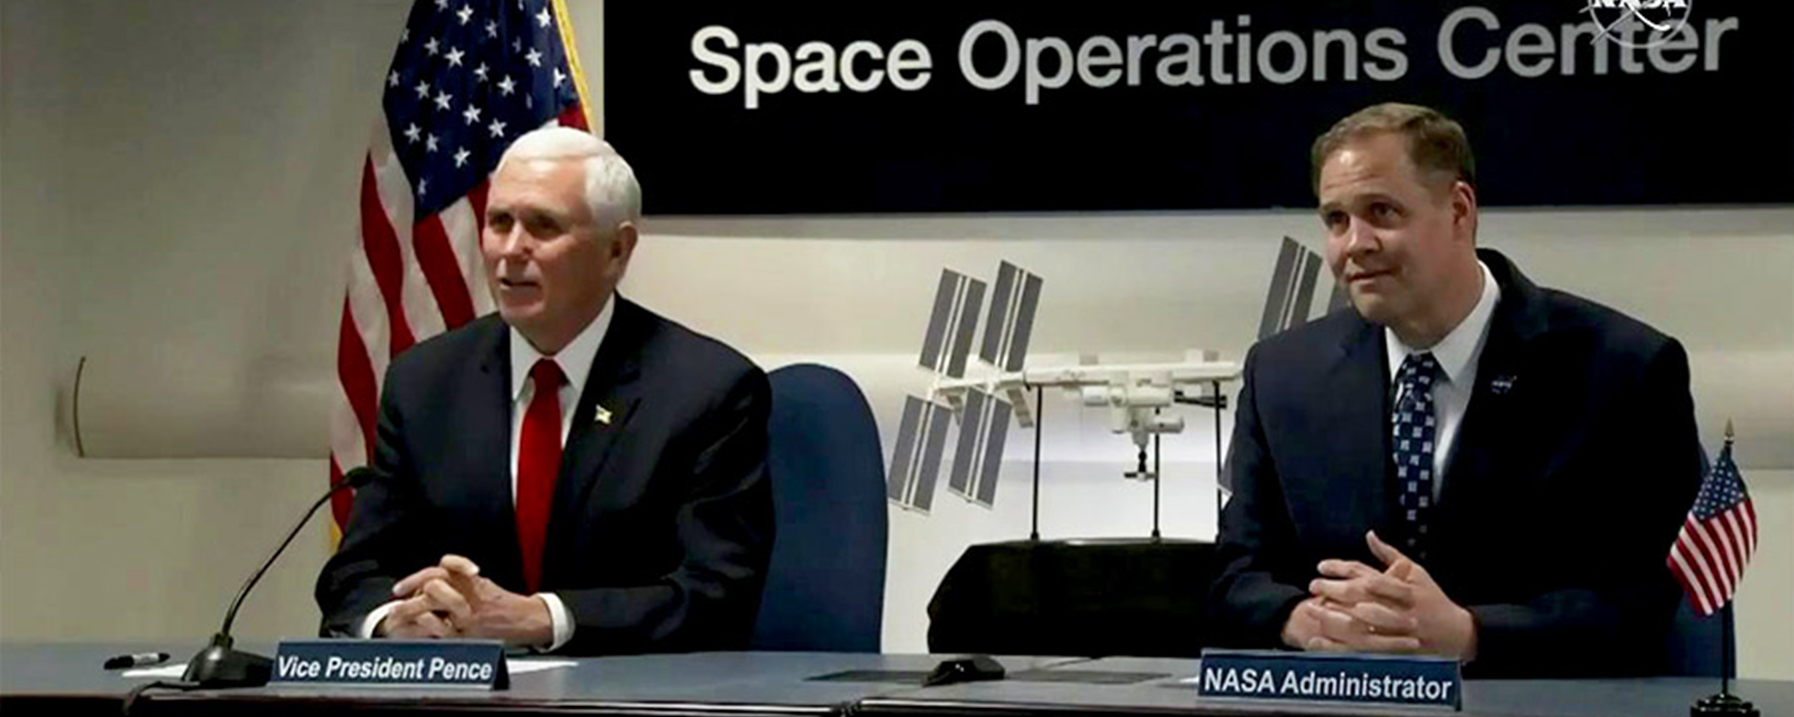 Vice President Mike Pence and NASA Administrator Jim Bridenstine called up to the Expedition 58 crew today from NASA HQ.